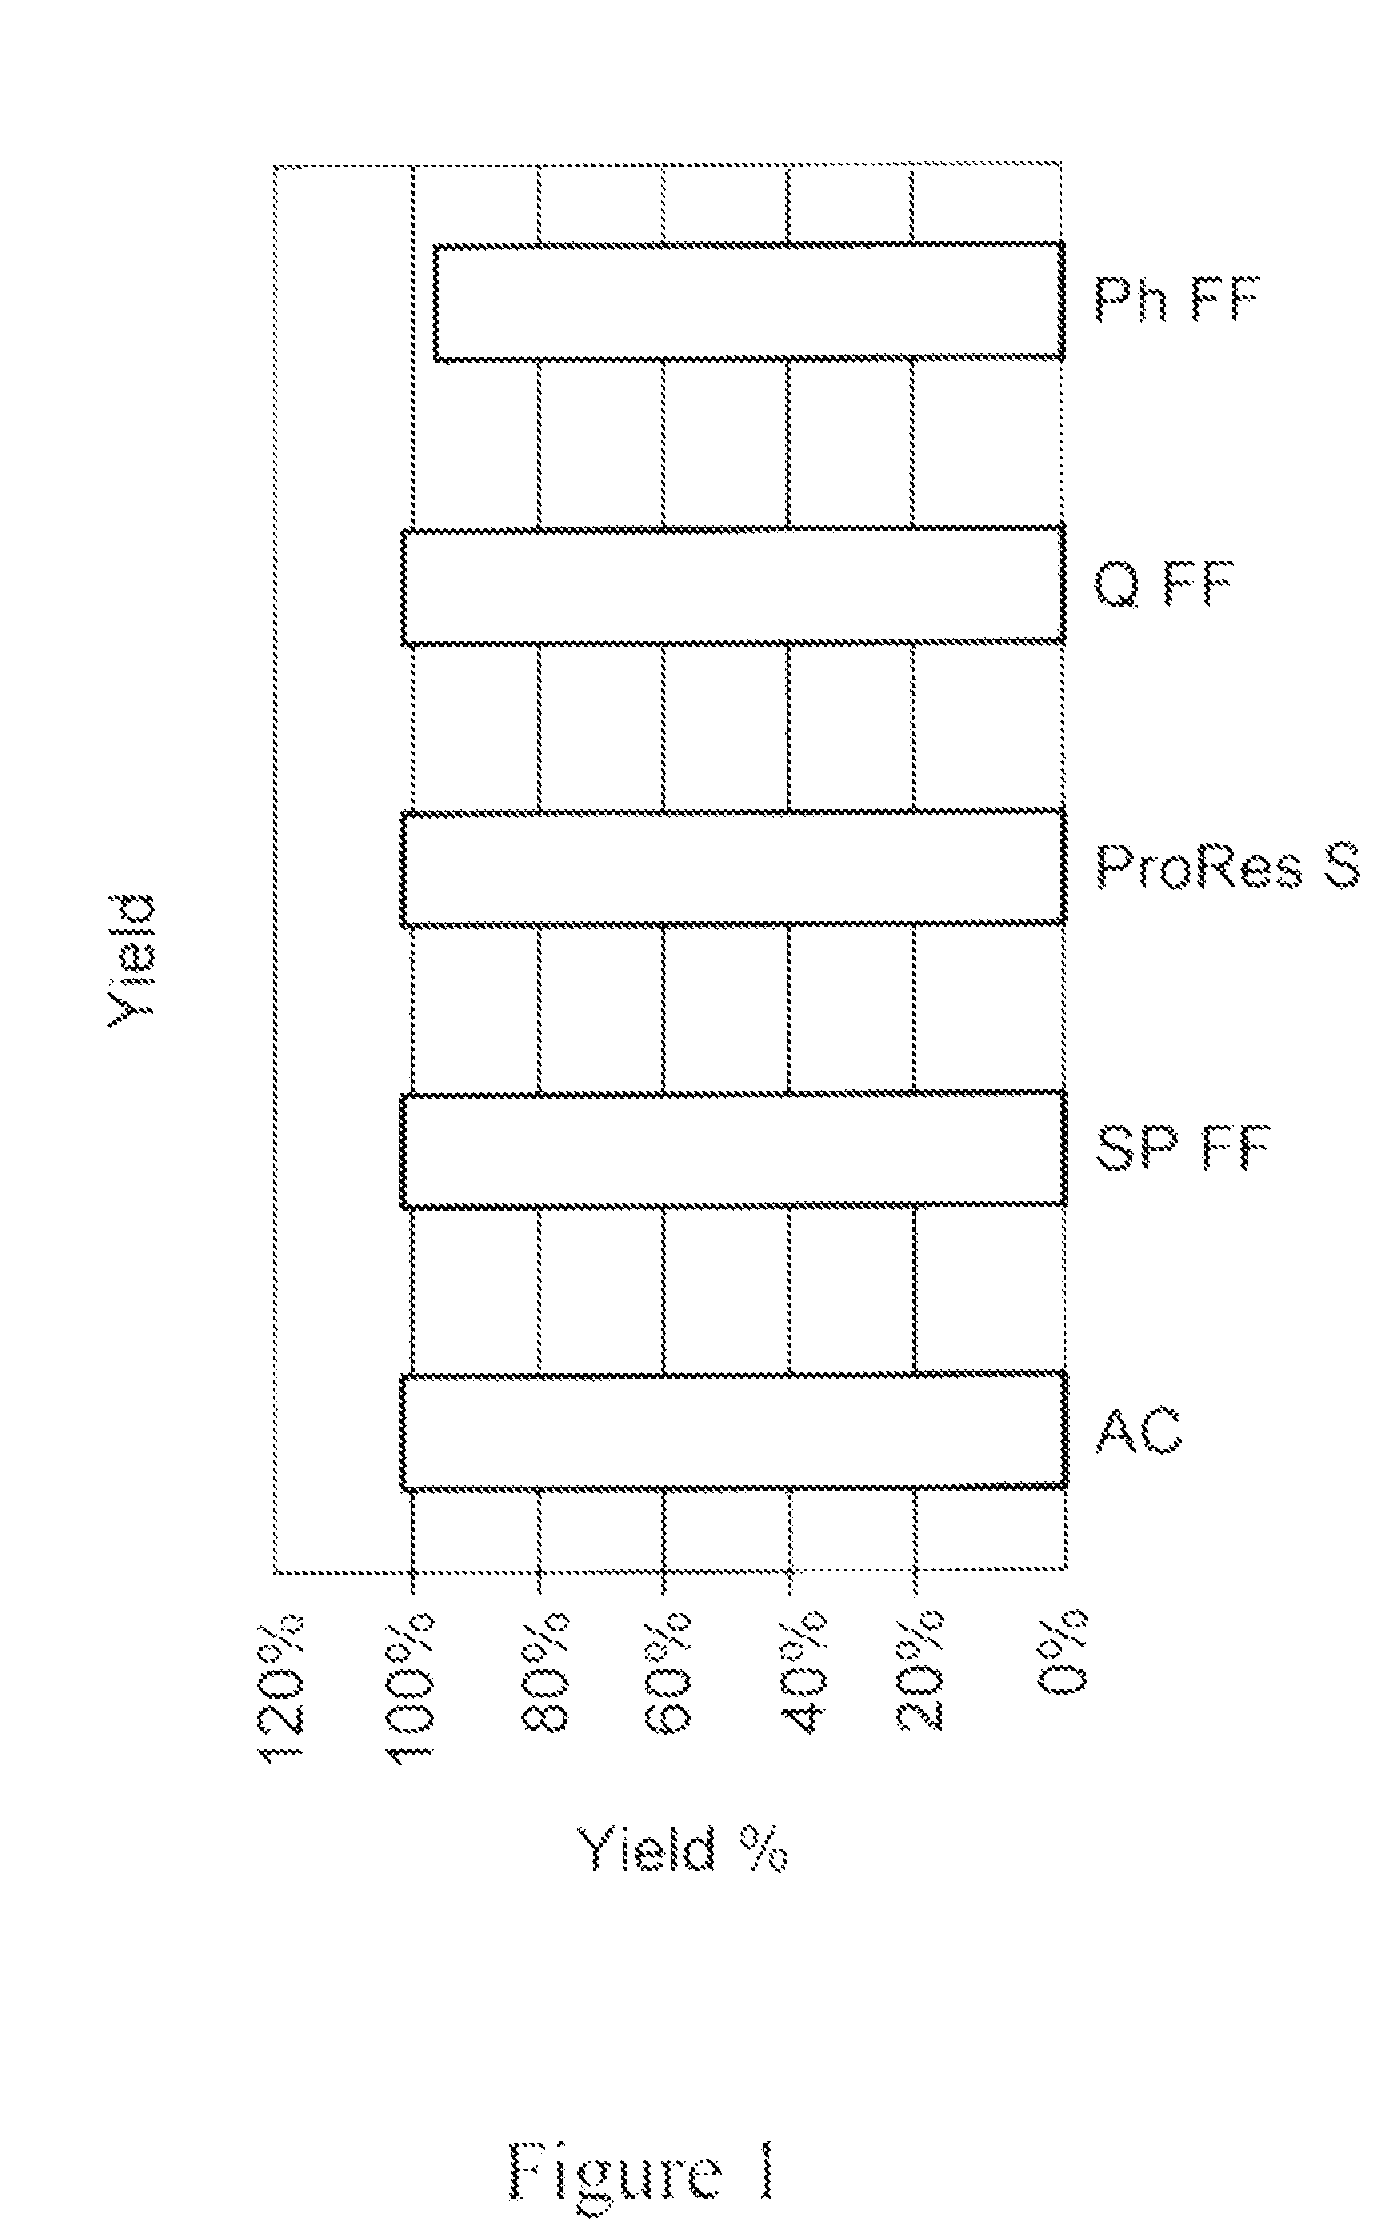 Methods of reducing level of one or more impurities in a sample during protein purification